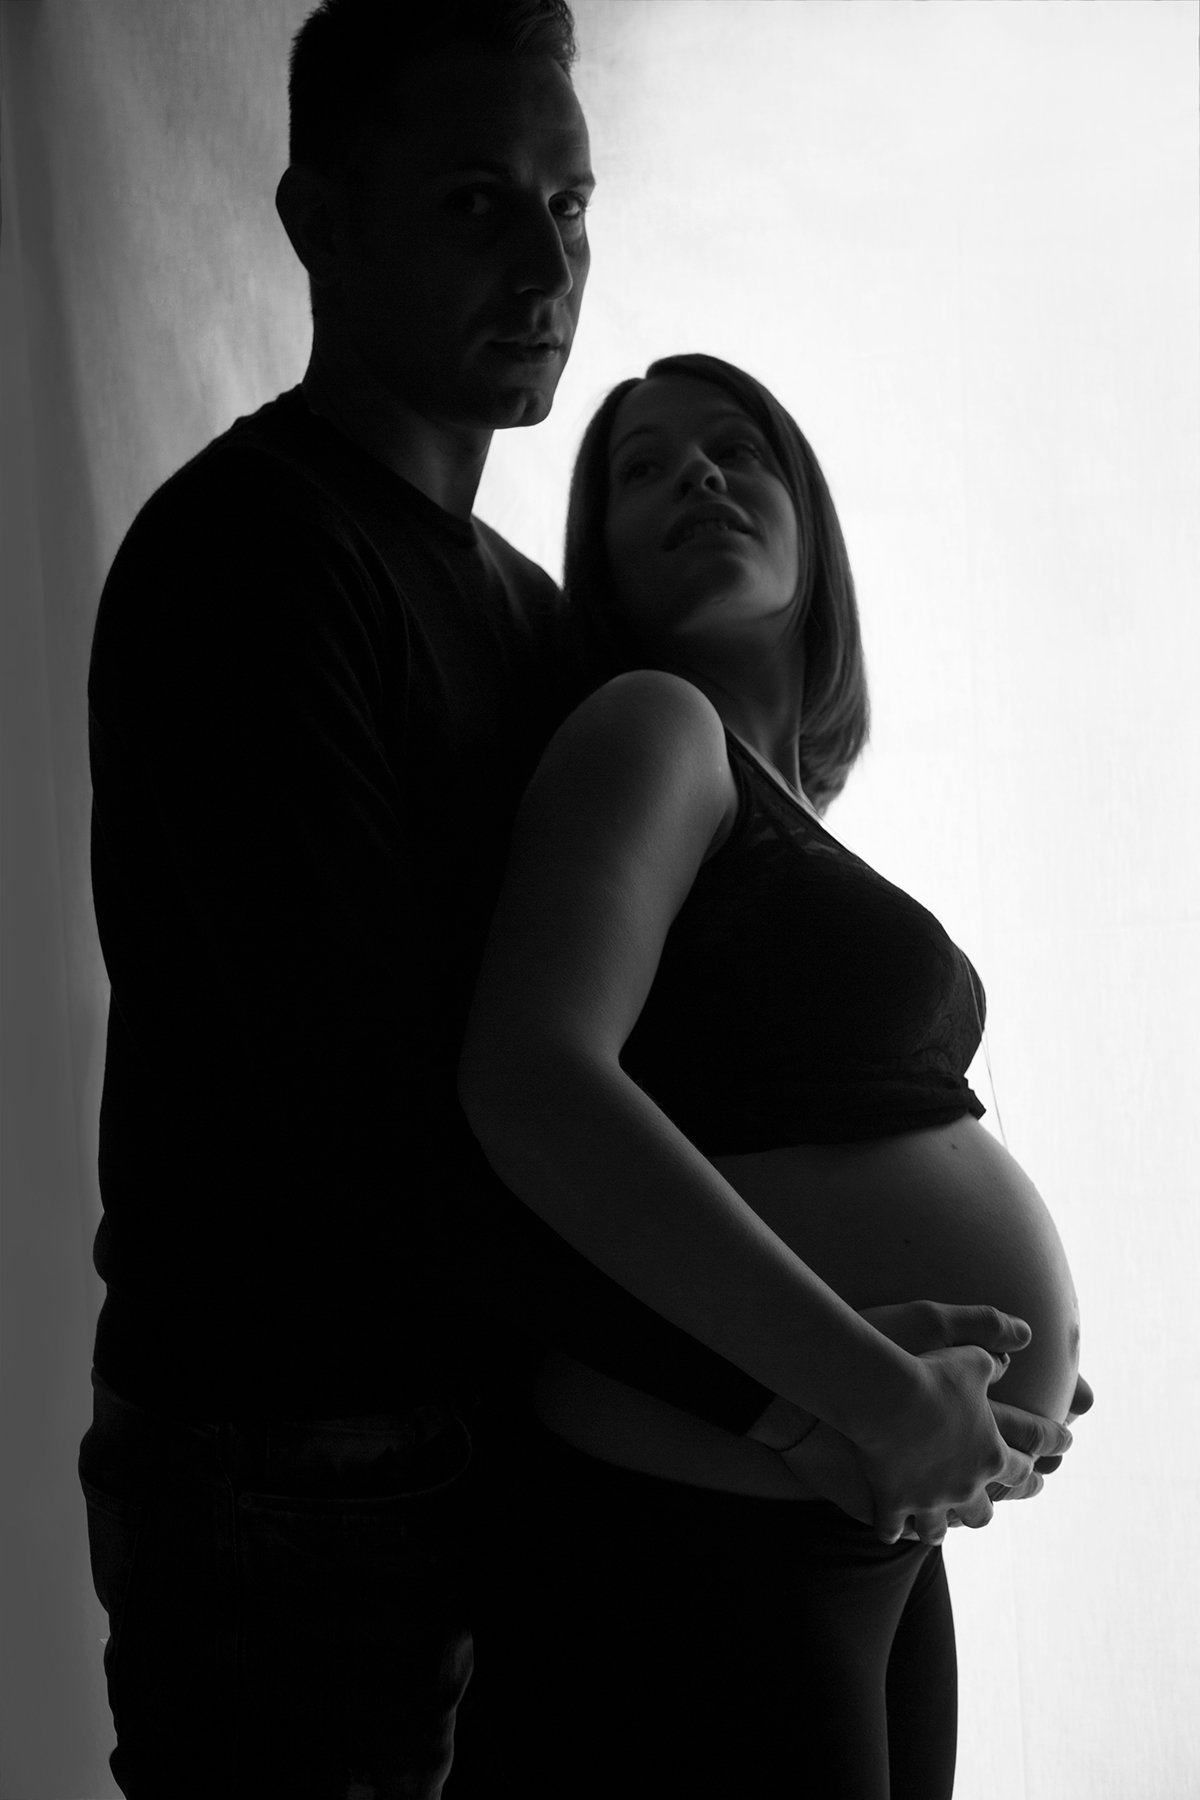 pregnancy black and white Love mother couple pregnant belly blackandwhite